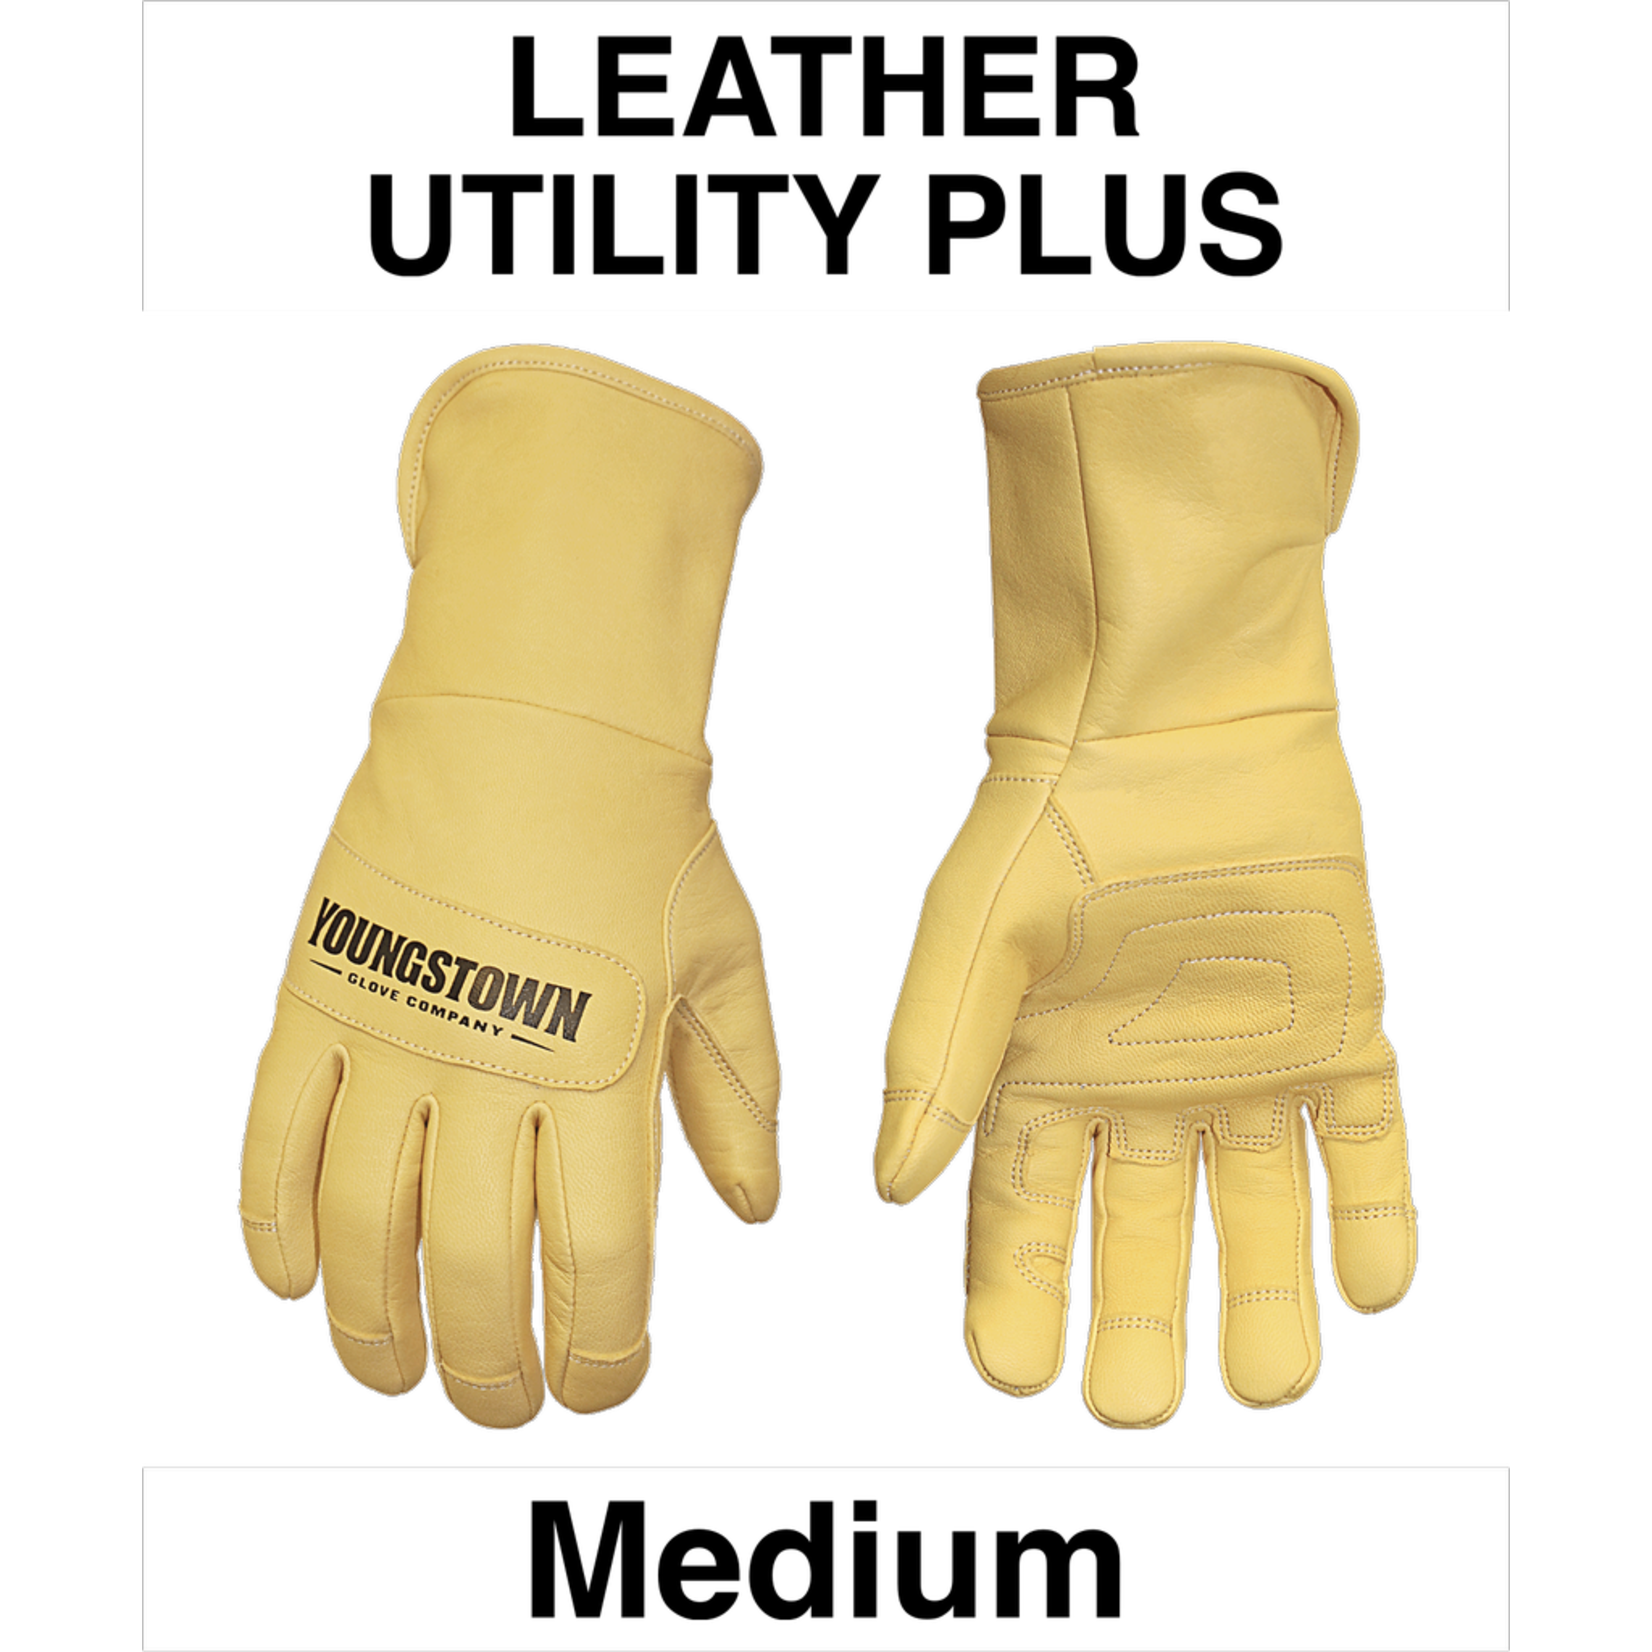 Youngstown Gloves Leather Utility Plus